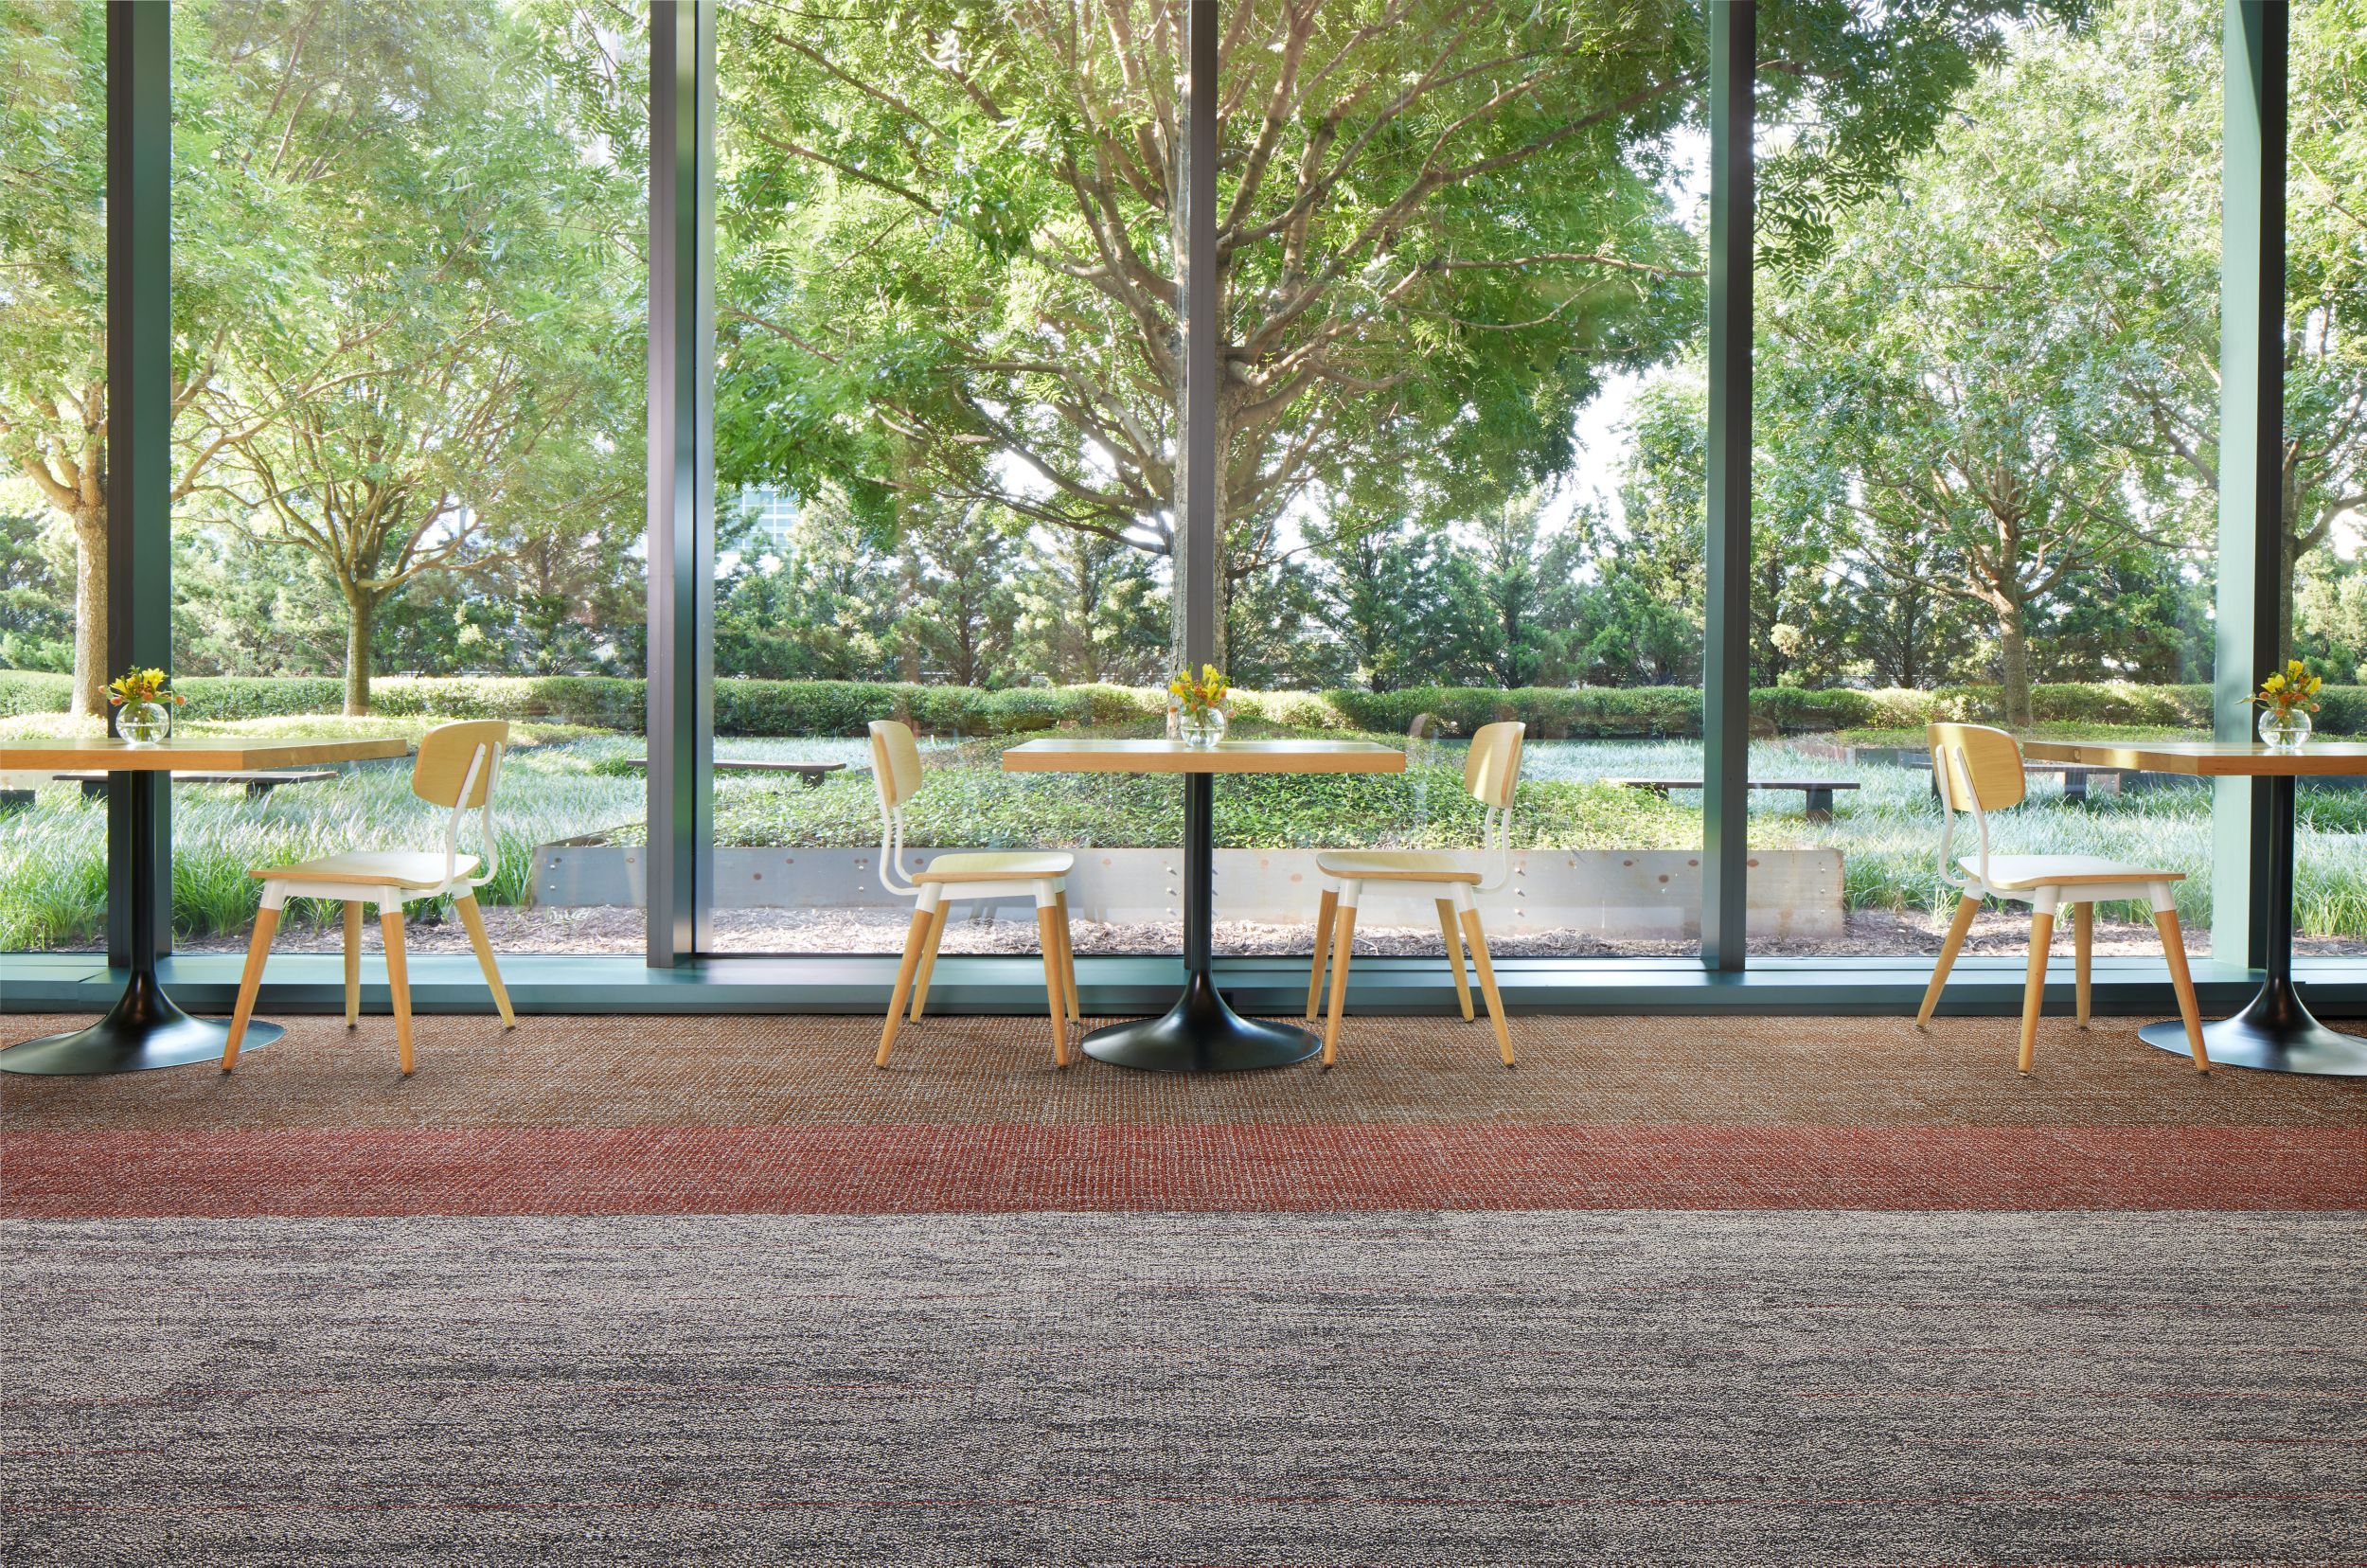 Interface Open Air Stria 402 and Open Ended carpet tile in lobby setting with tables and open plan windows imagen número 4